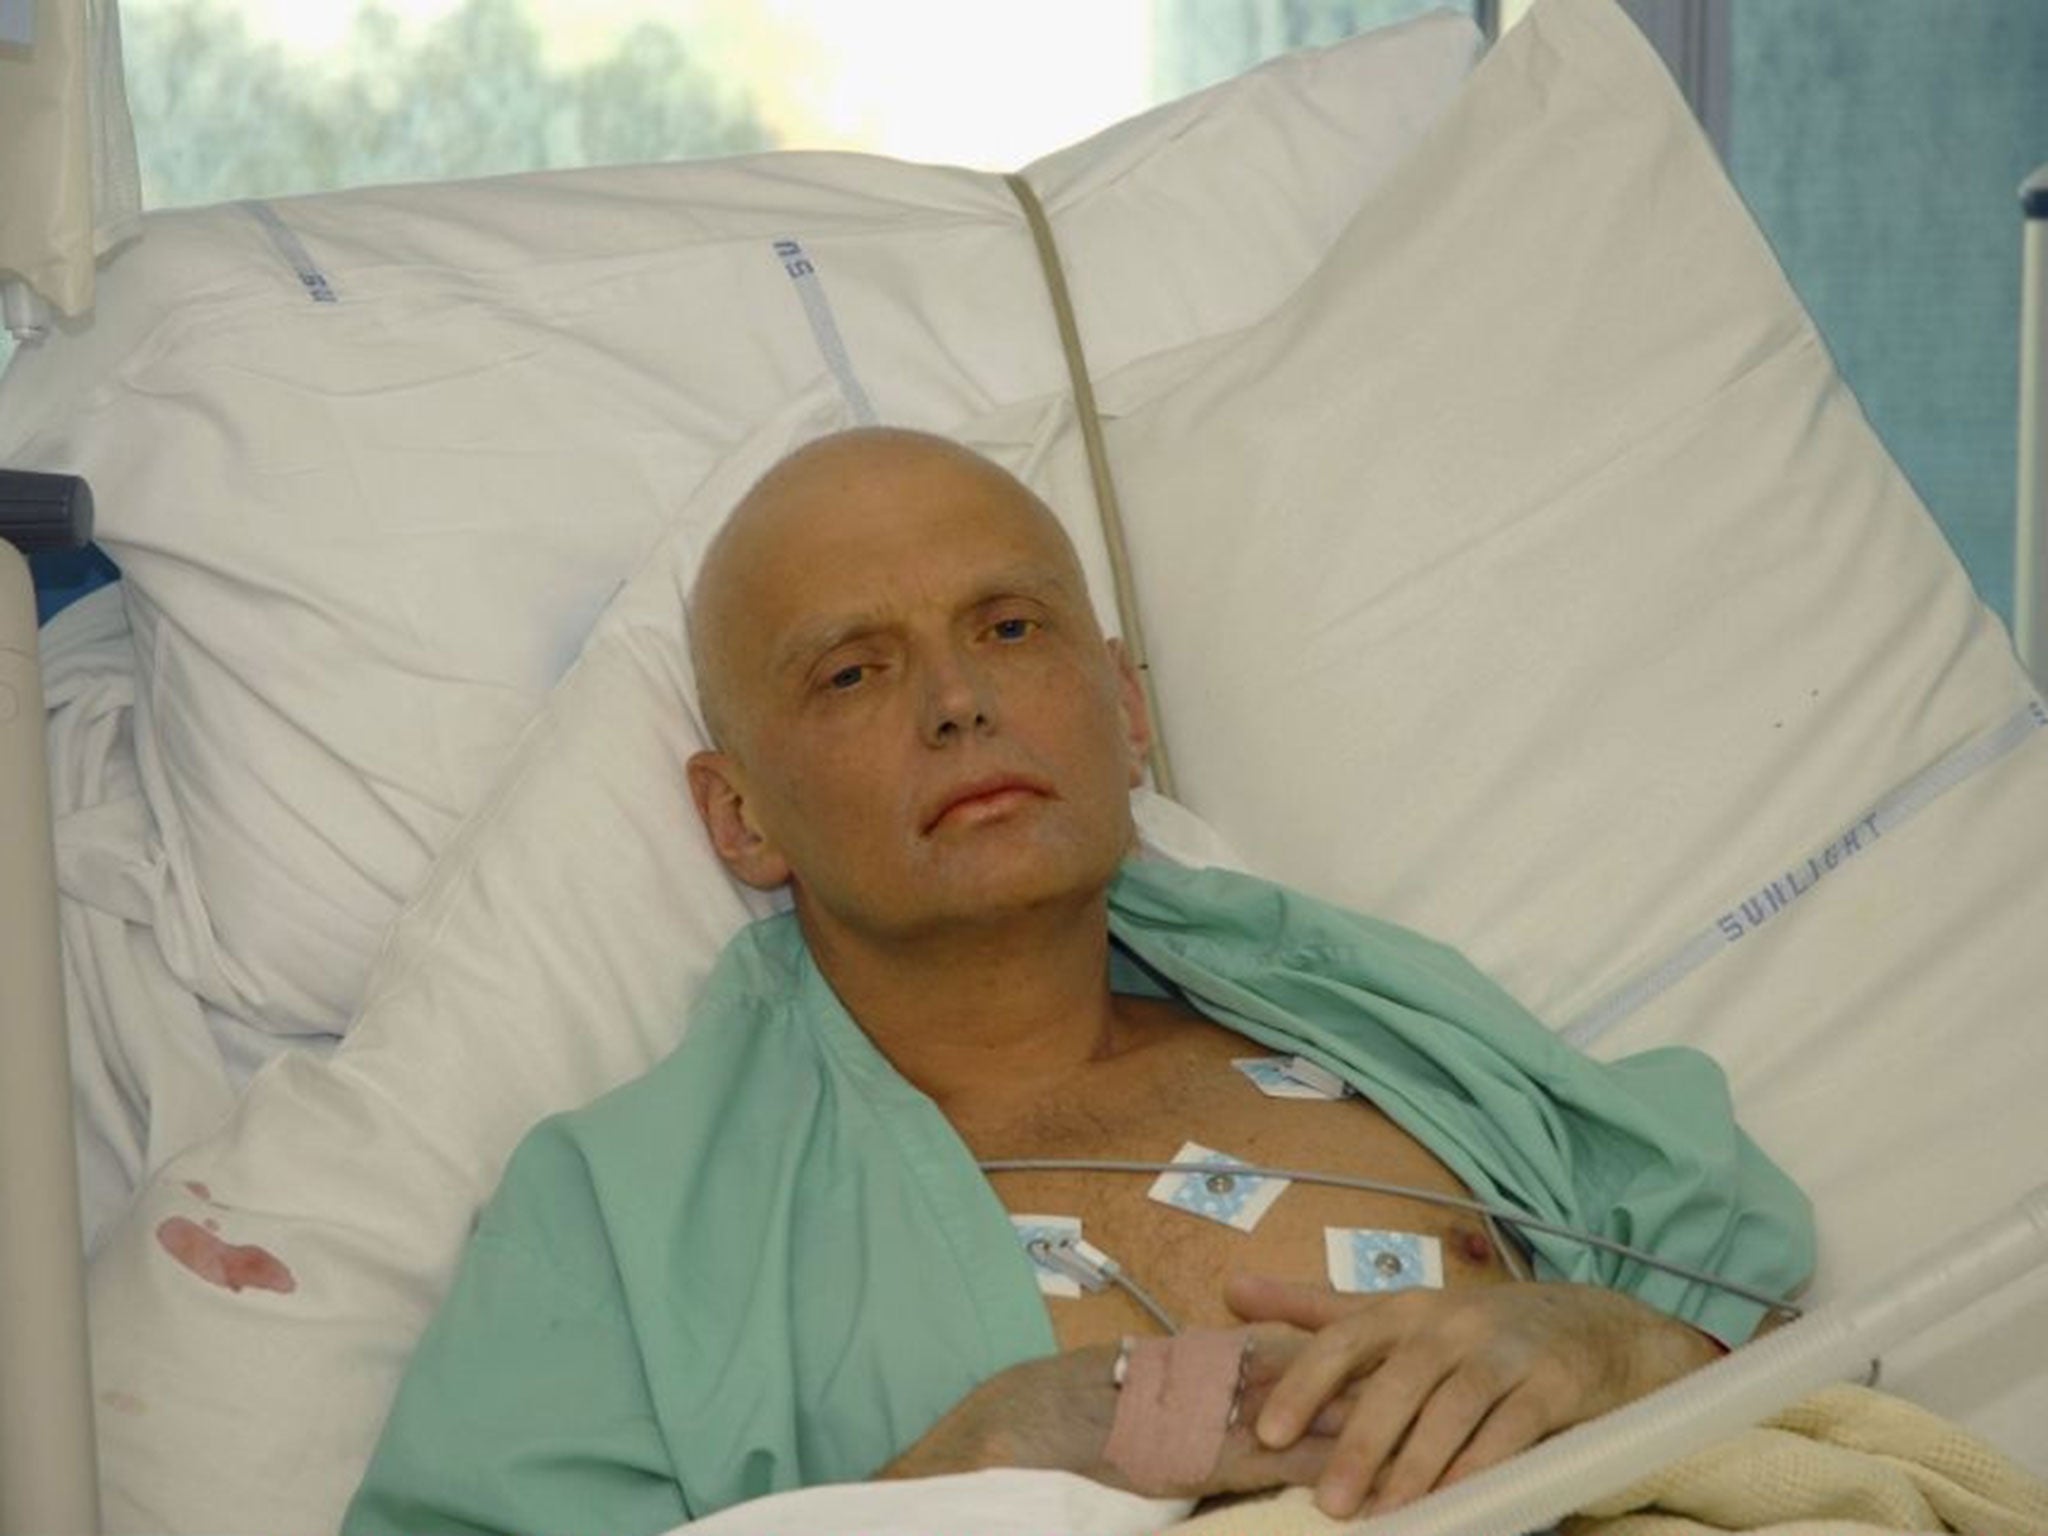 Alexander Litvinenko pictured at the Intensive Care Unit of University College Hospital on November 20, 2006 in London